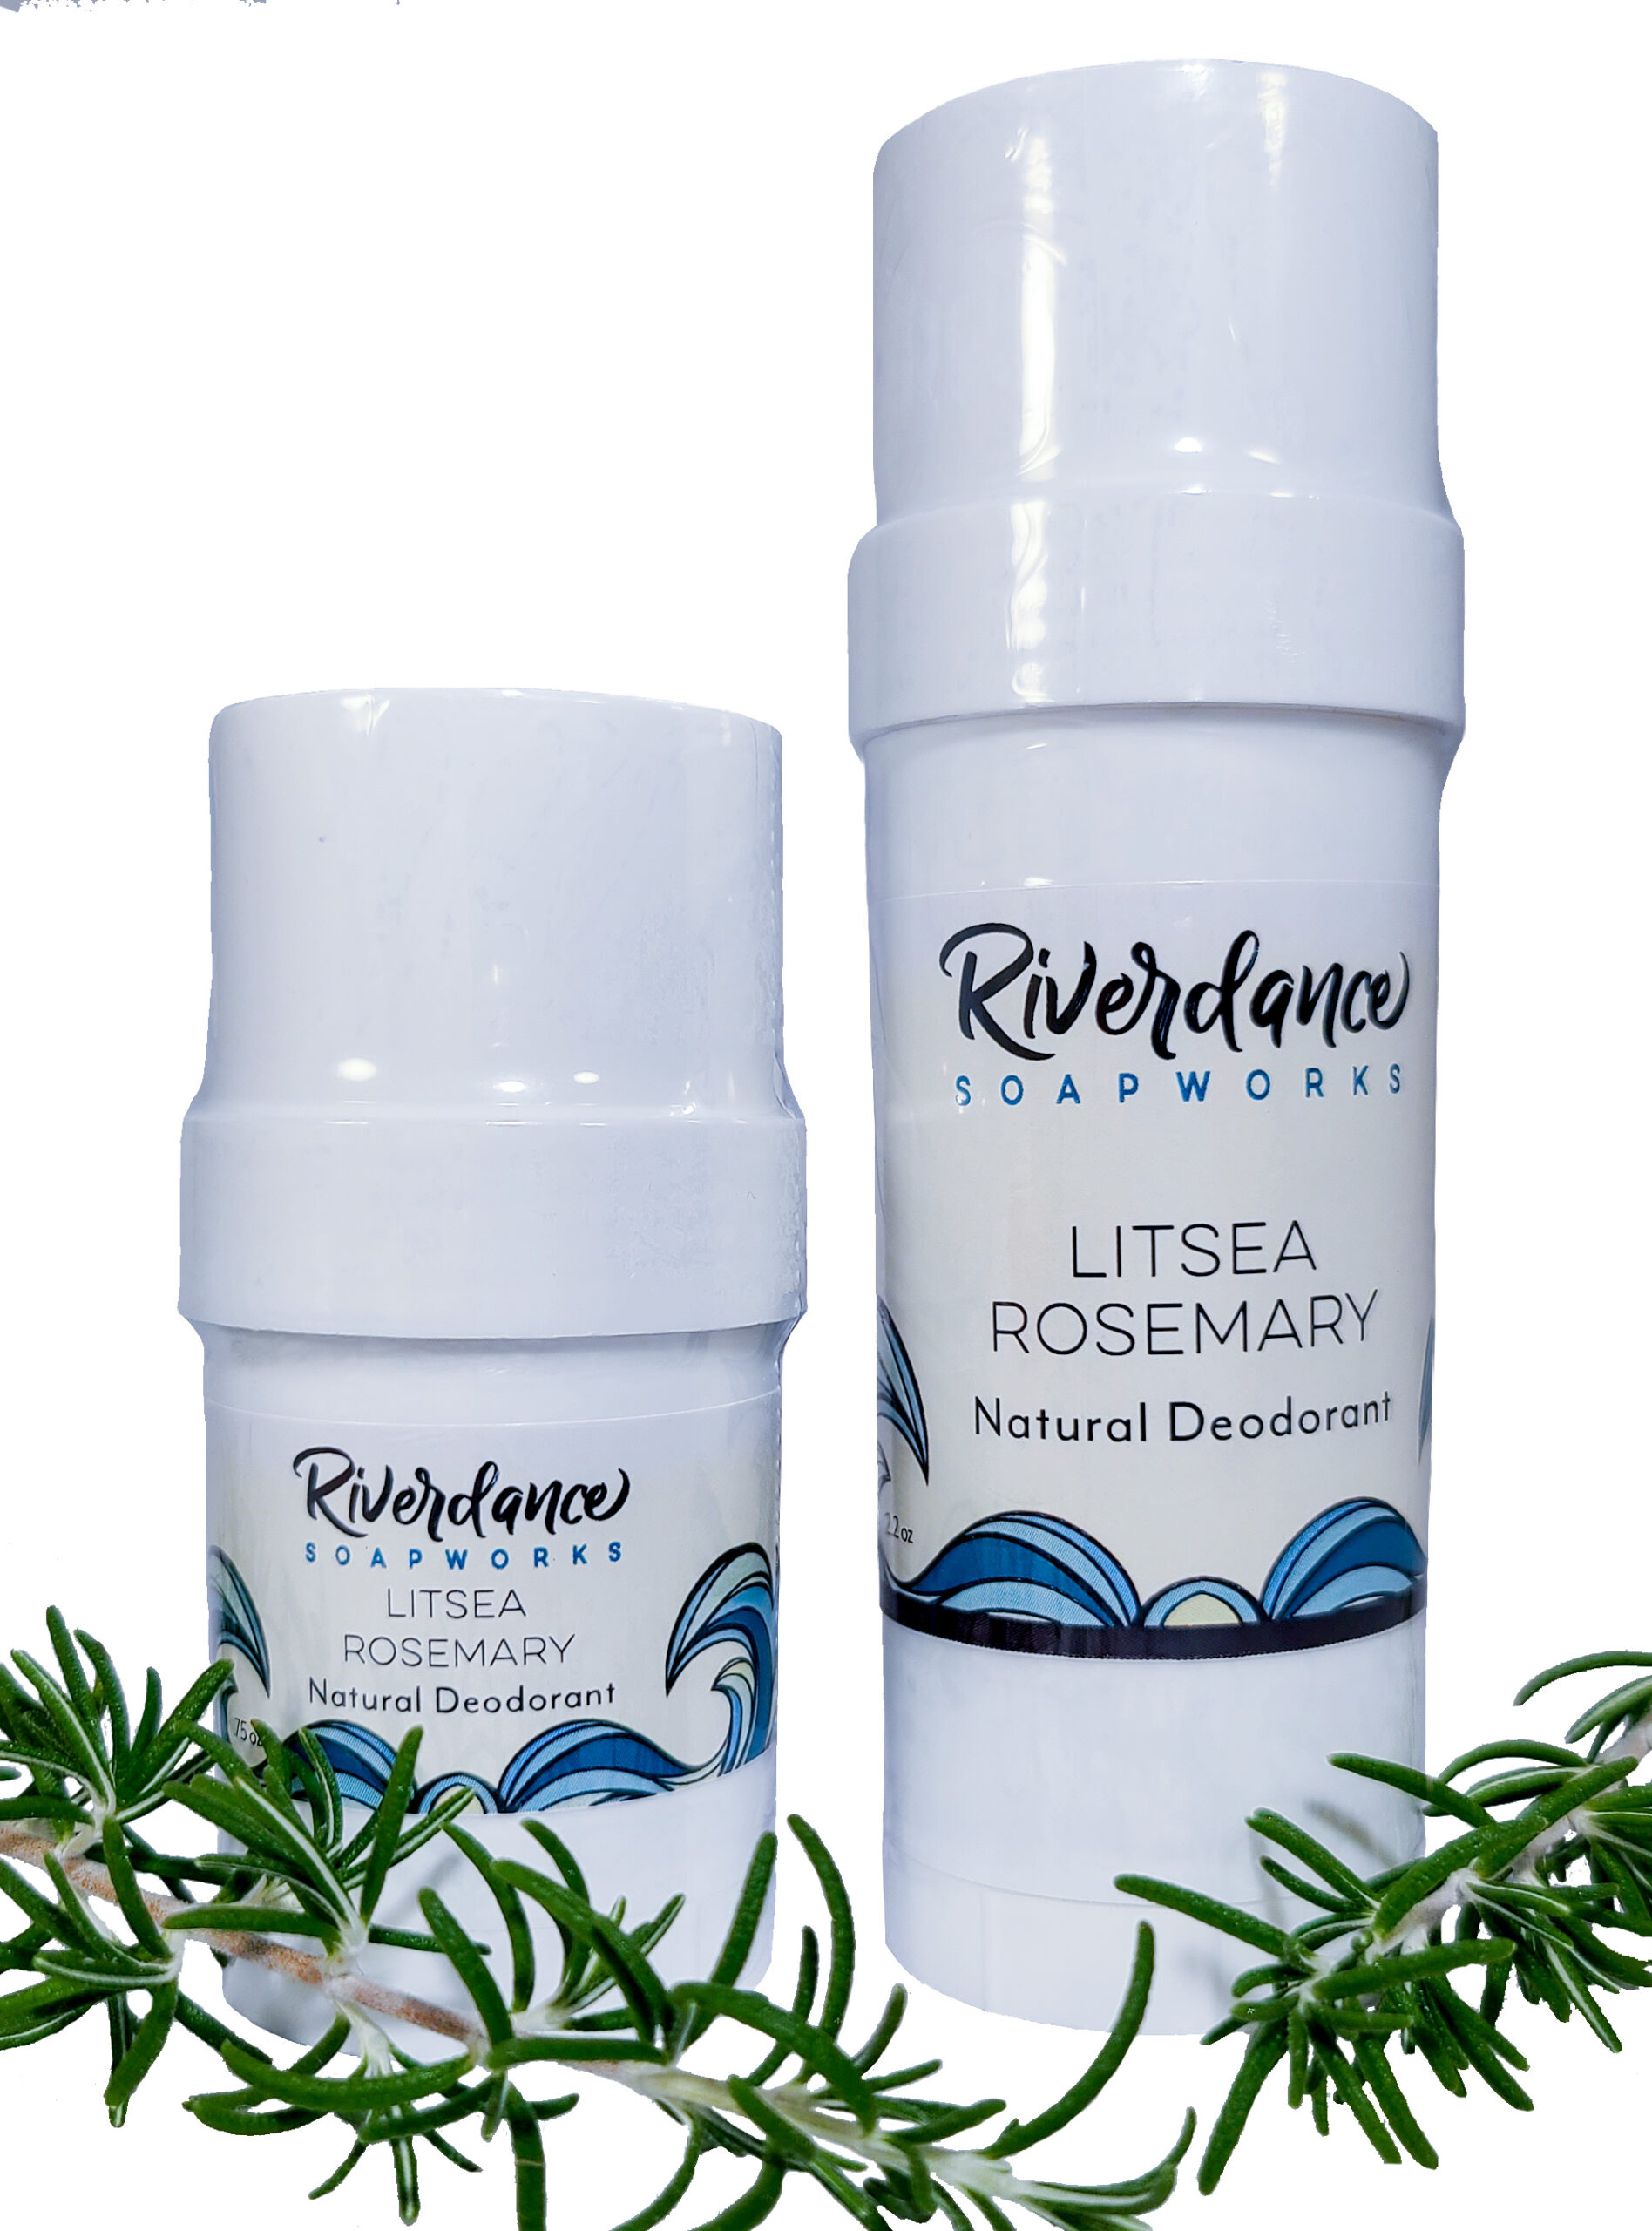 Product image for Litsea Rosemary Natural Deodorant